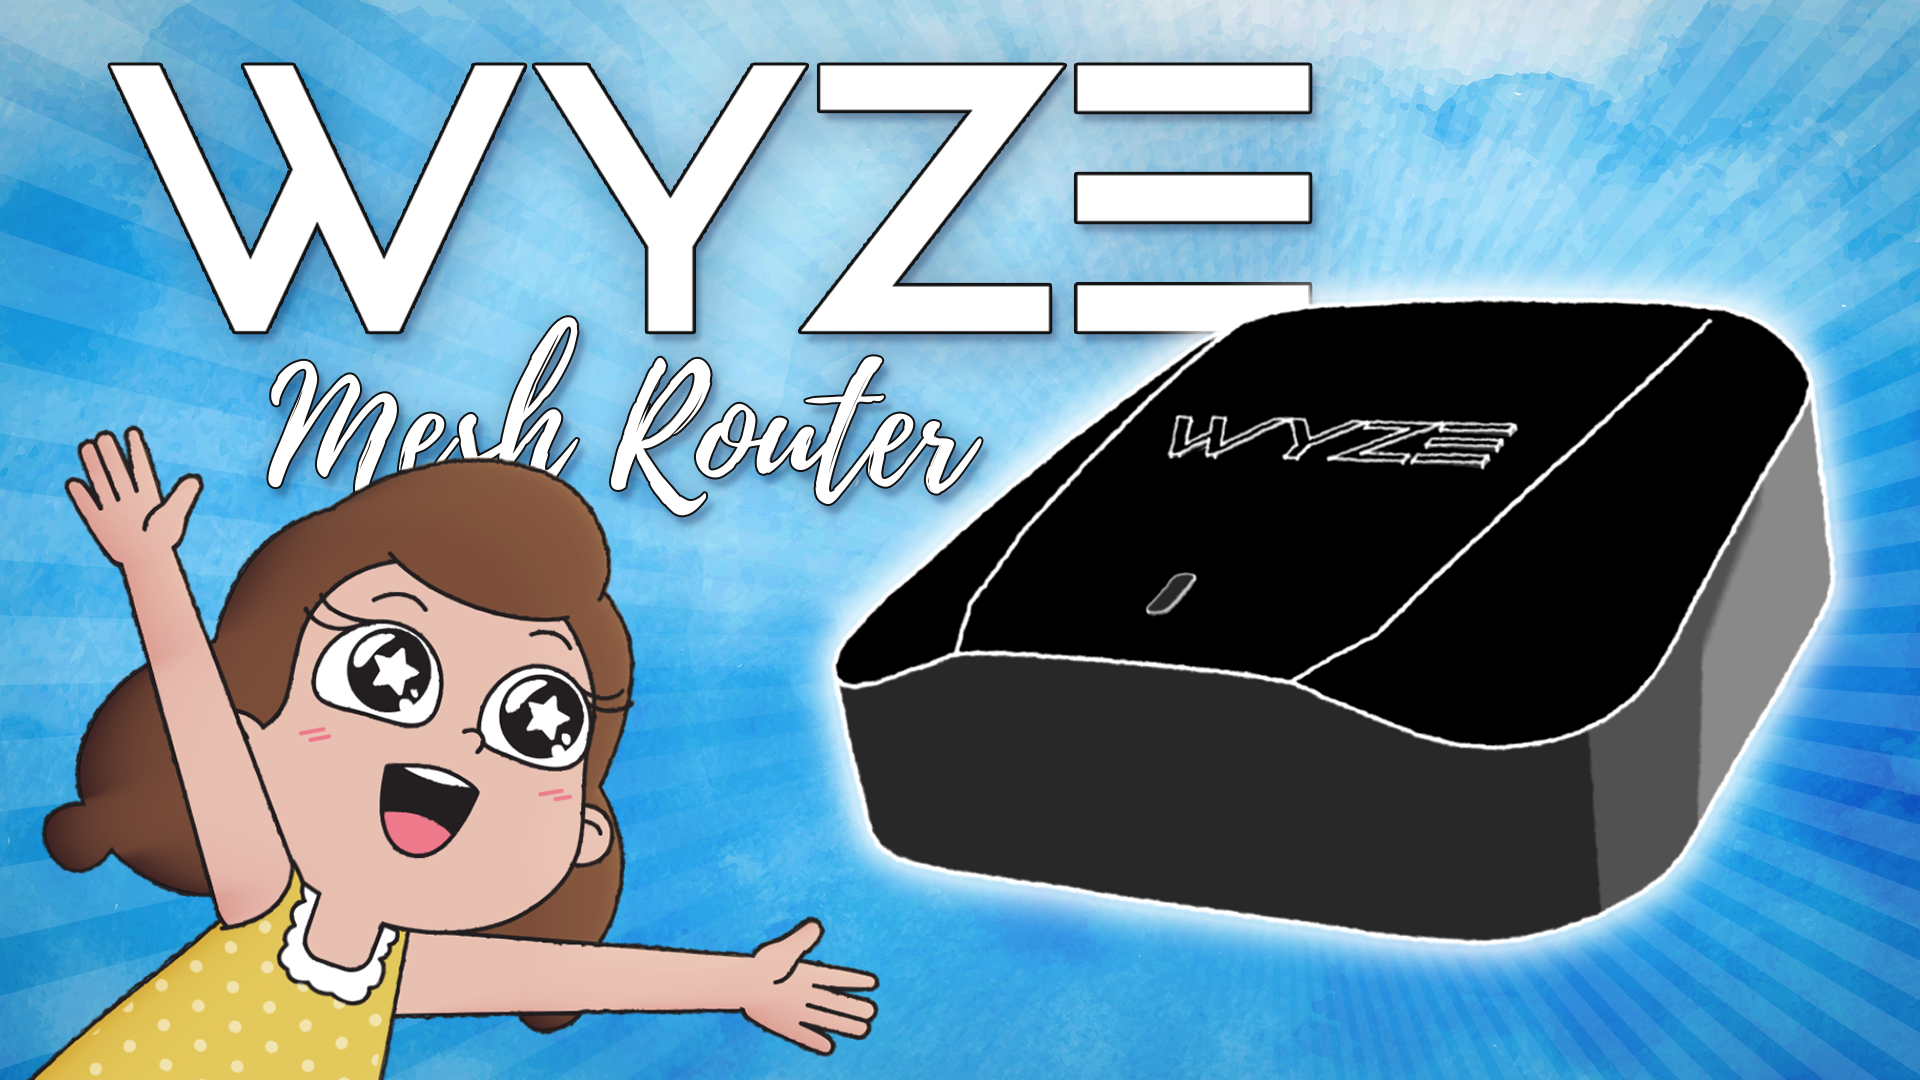 Load video: Wyze Mesh Router animated commercial